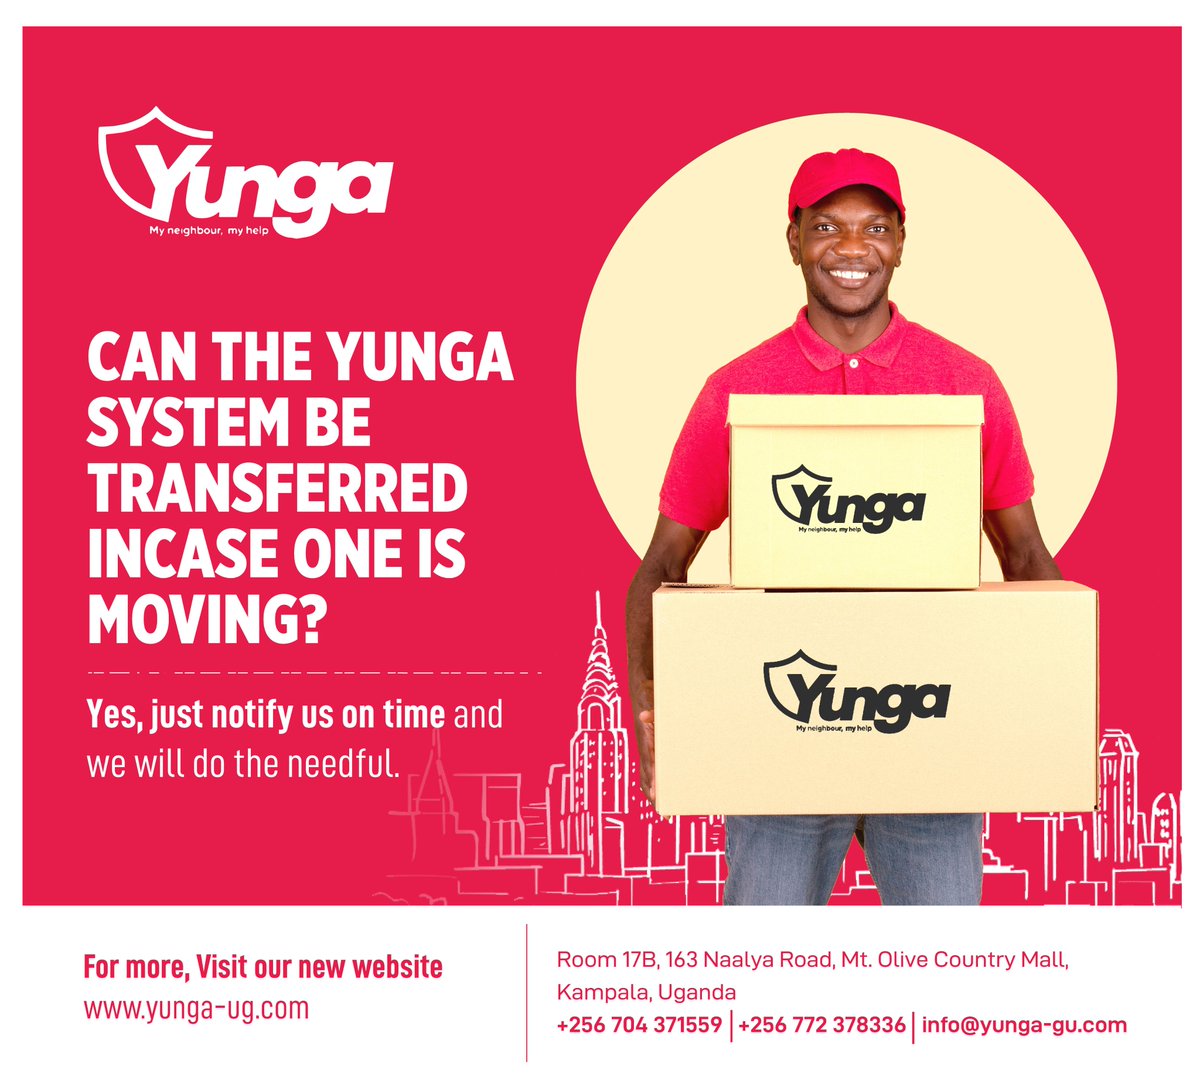 Some of you were worried about the fate of your Yunga system if you move. We're here to assure you that you can easily change locations WITHOUT losing your system. Just inform us in advance, and we'll assist you with the transition Check out our benefits: yunga-ug.com/products/